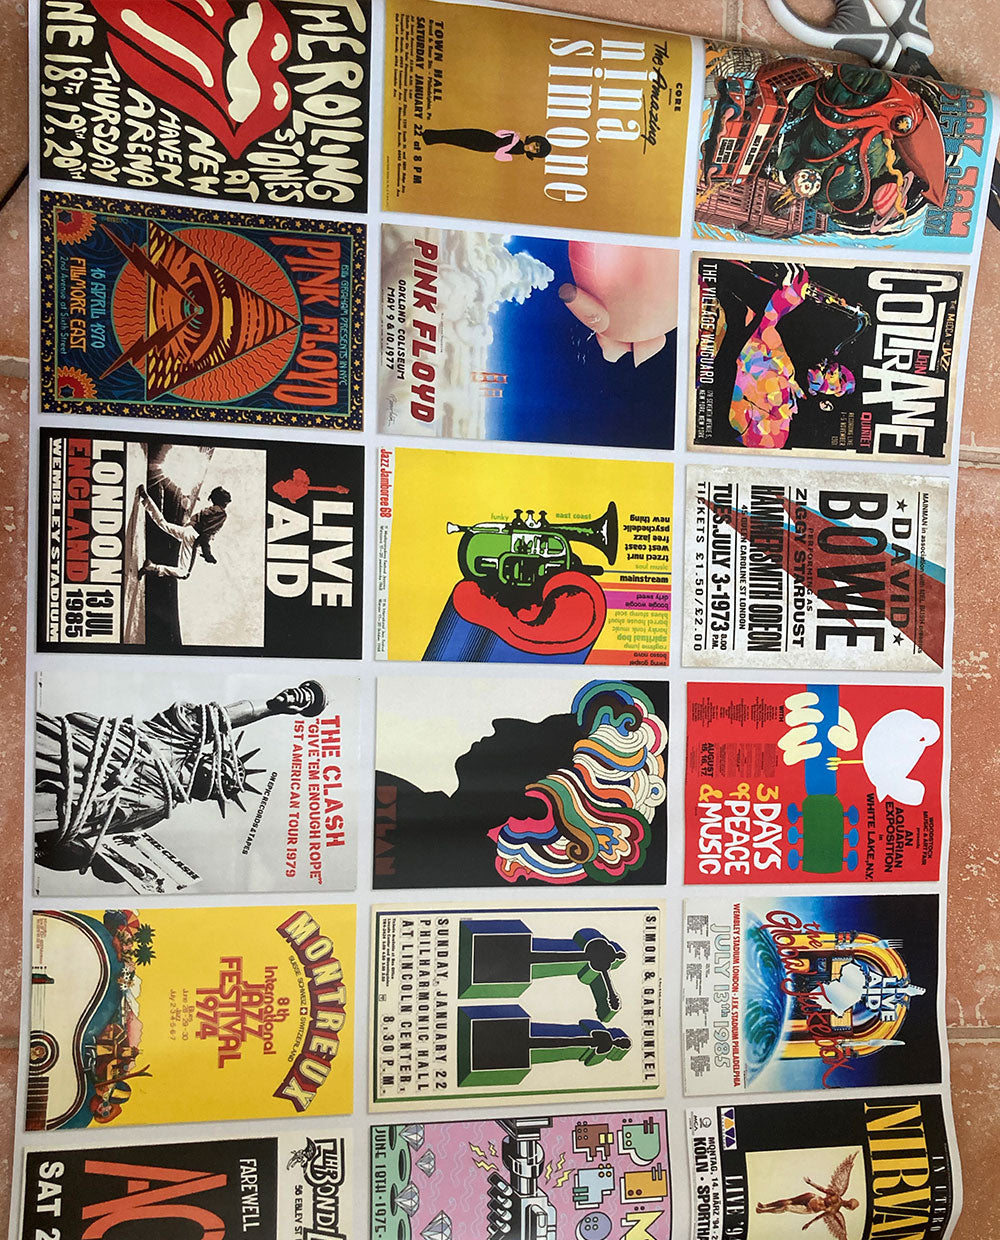 Music posters 25.5"x18.5"